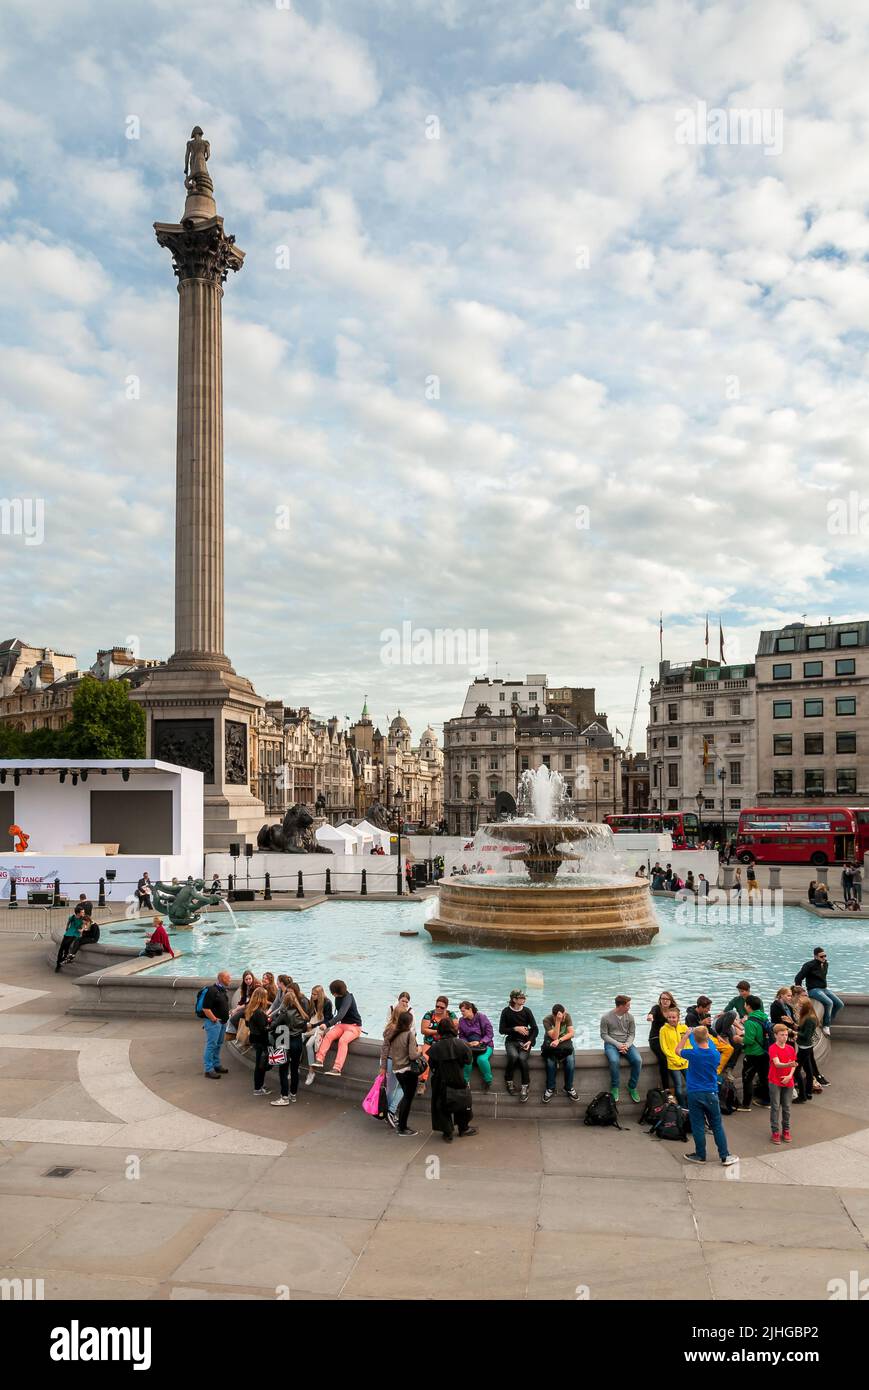 London, England, United Kingdom - September 26, 2013: People resting beside the fountain on the Trafalgar Square in central London. Stock Photo